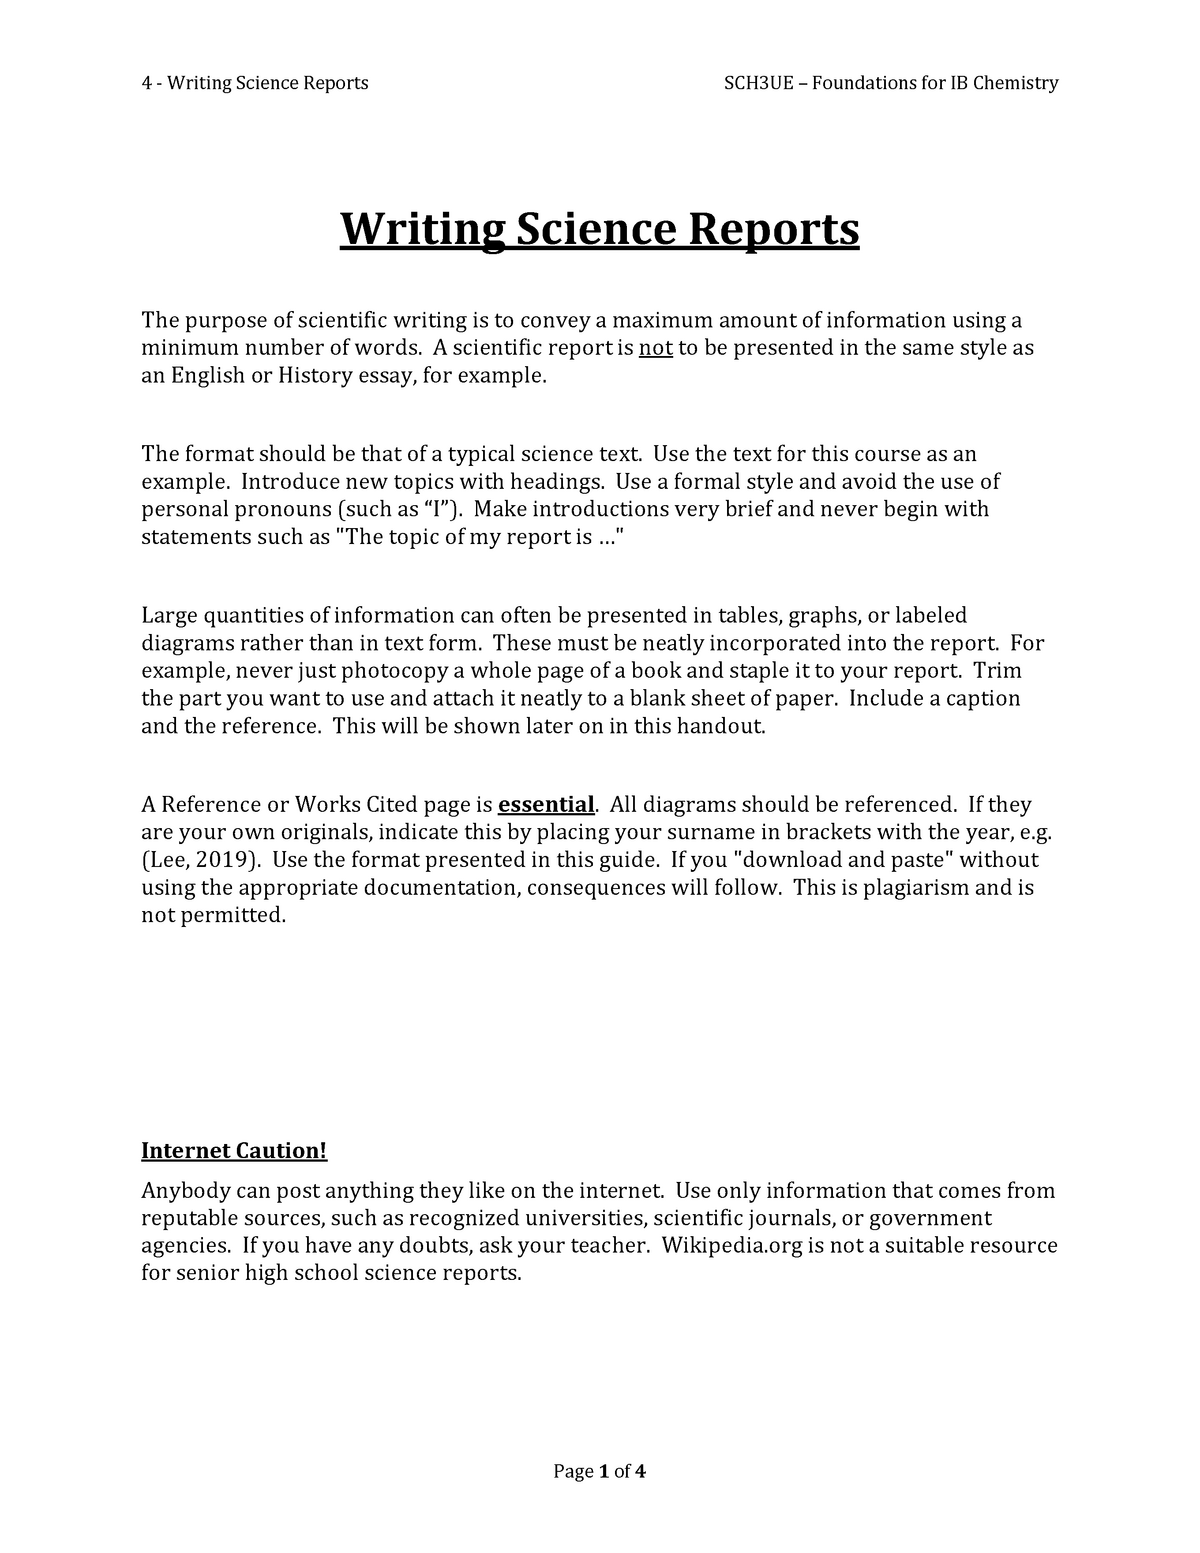 science report research article